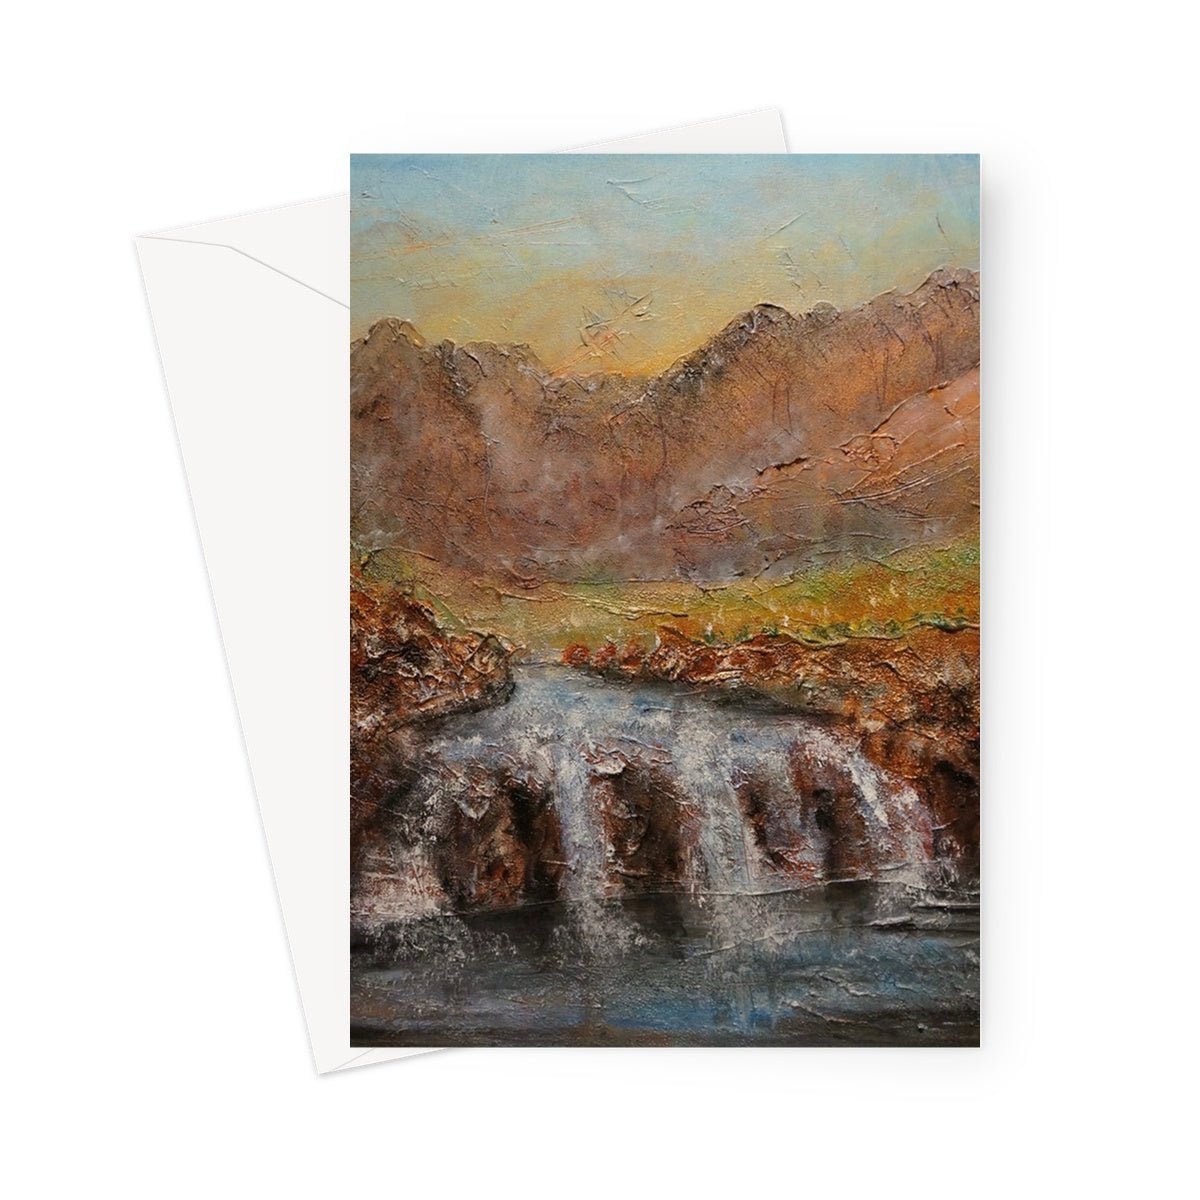 Fairy Pools Dawn Skye Art Gifts Greeting Card-Greetings Cards-Skye Art Gallery-5"x7"-1 Card-Paintings, Prints, Homeware, Art Gifts From Scotland By Scottish Artist Kevin Hunter